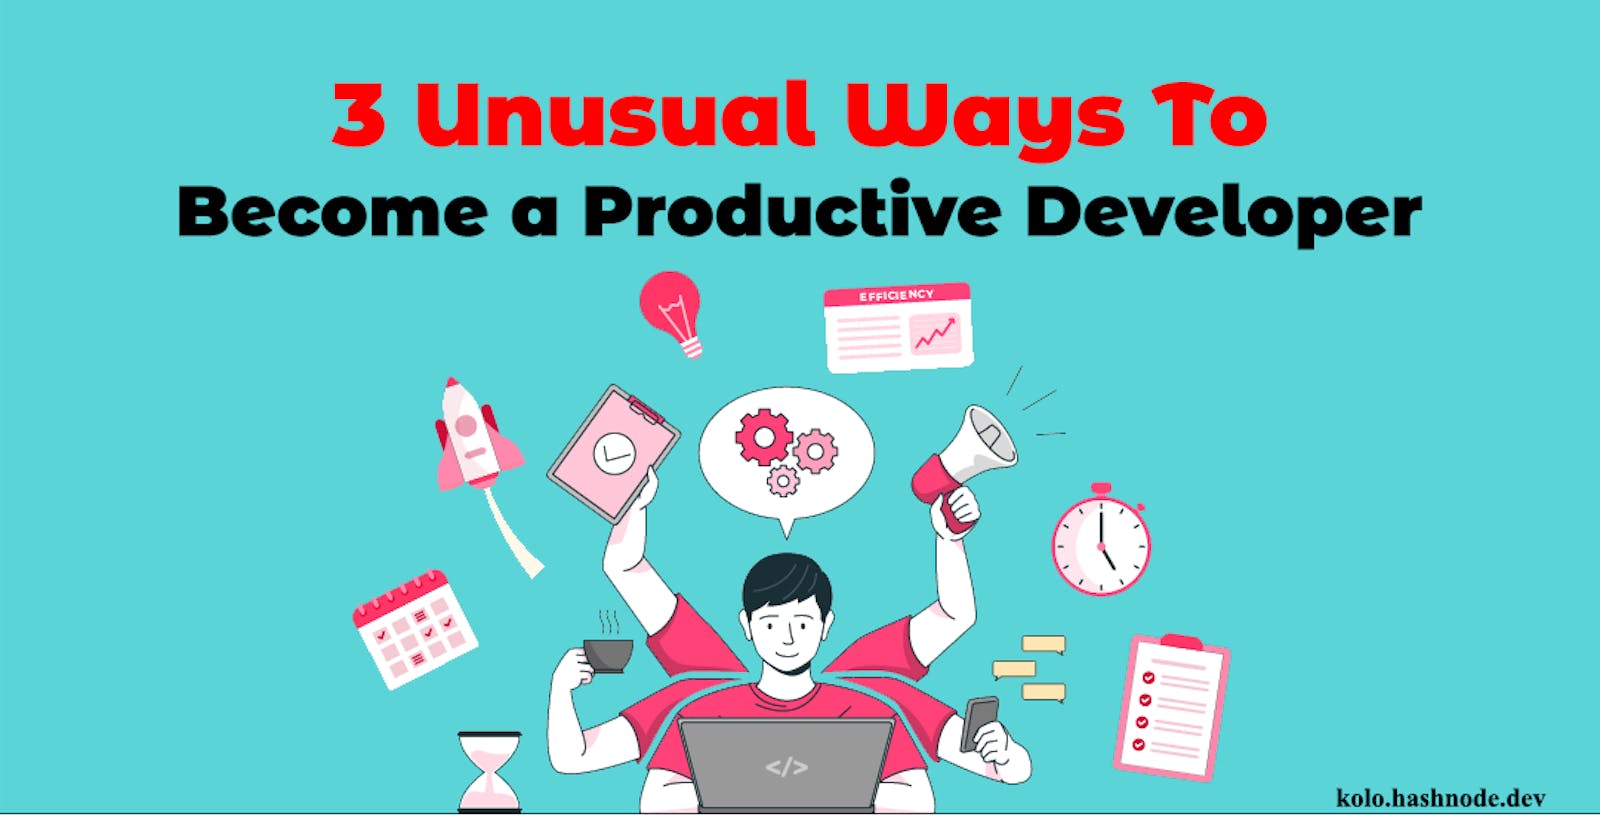 3 Unusual Ways To Become a Productive Developer